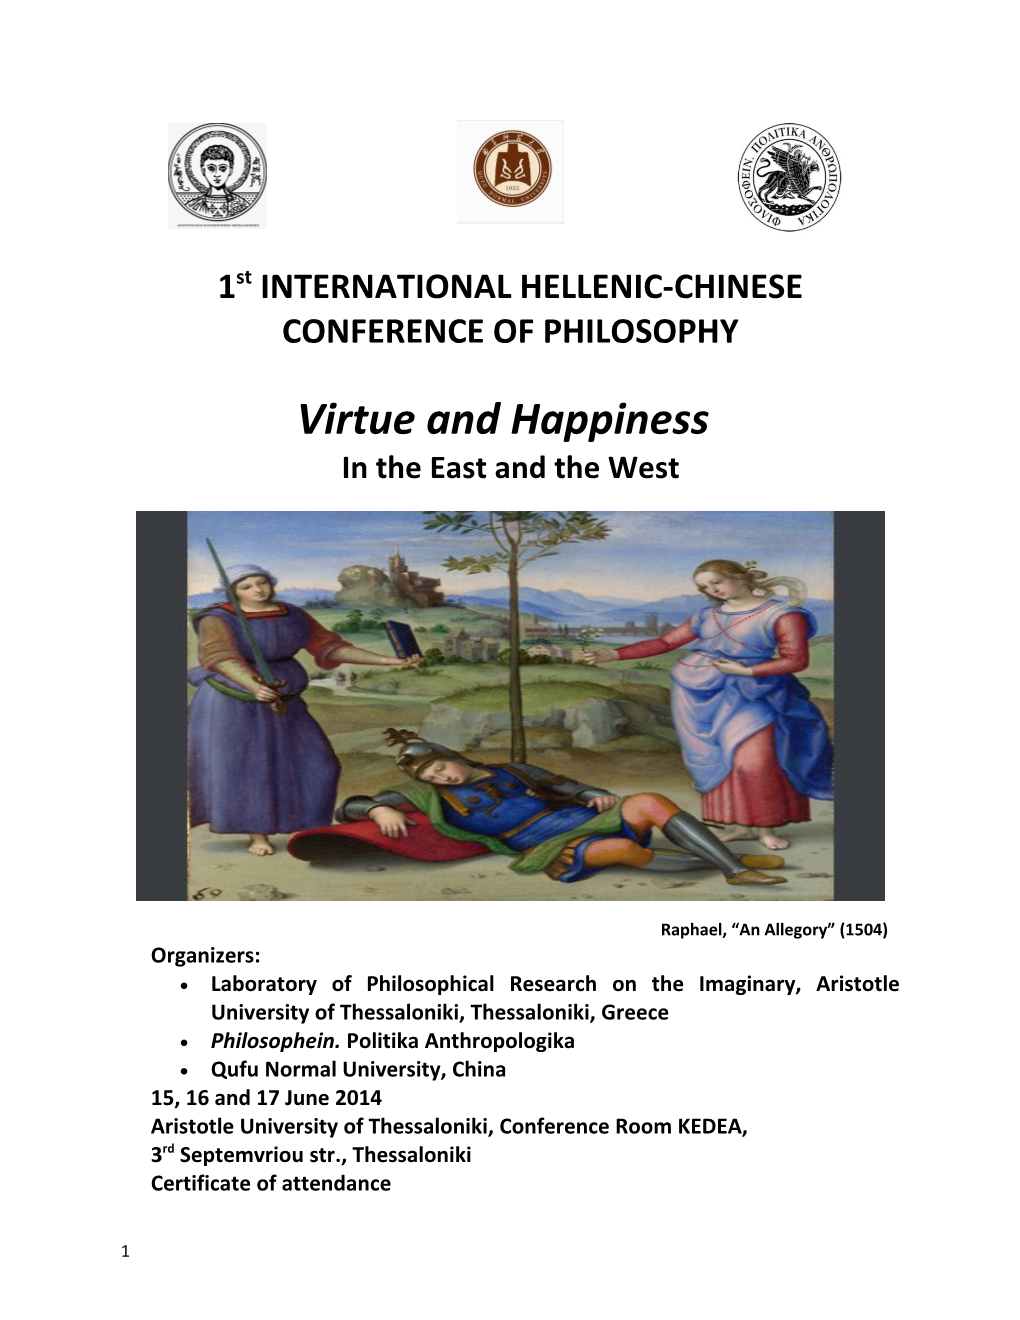 1St INTERNATIONAL HELLENIC-CHINESE CONFERENCE of PHILOSOPHY